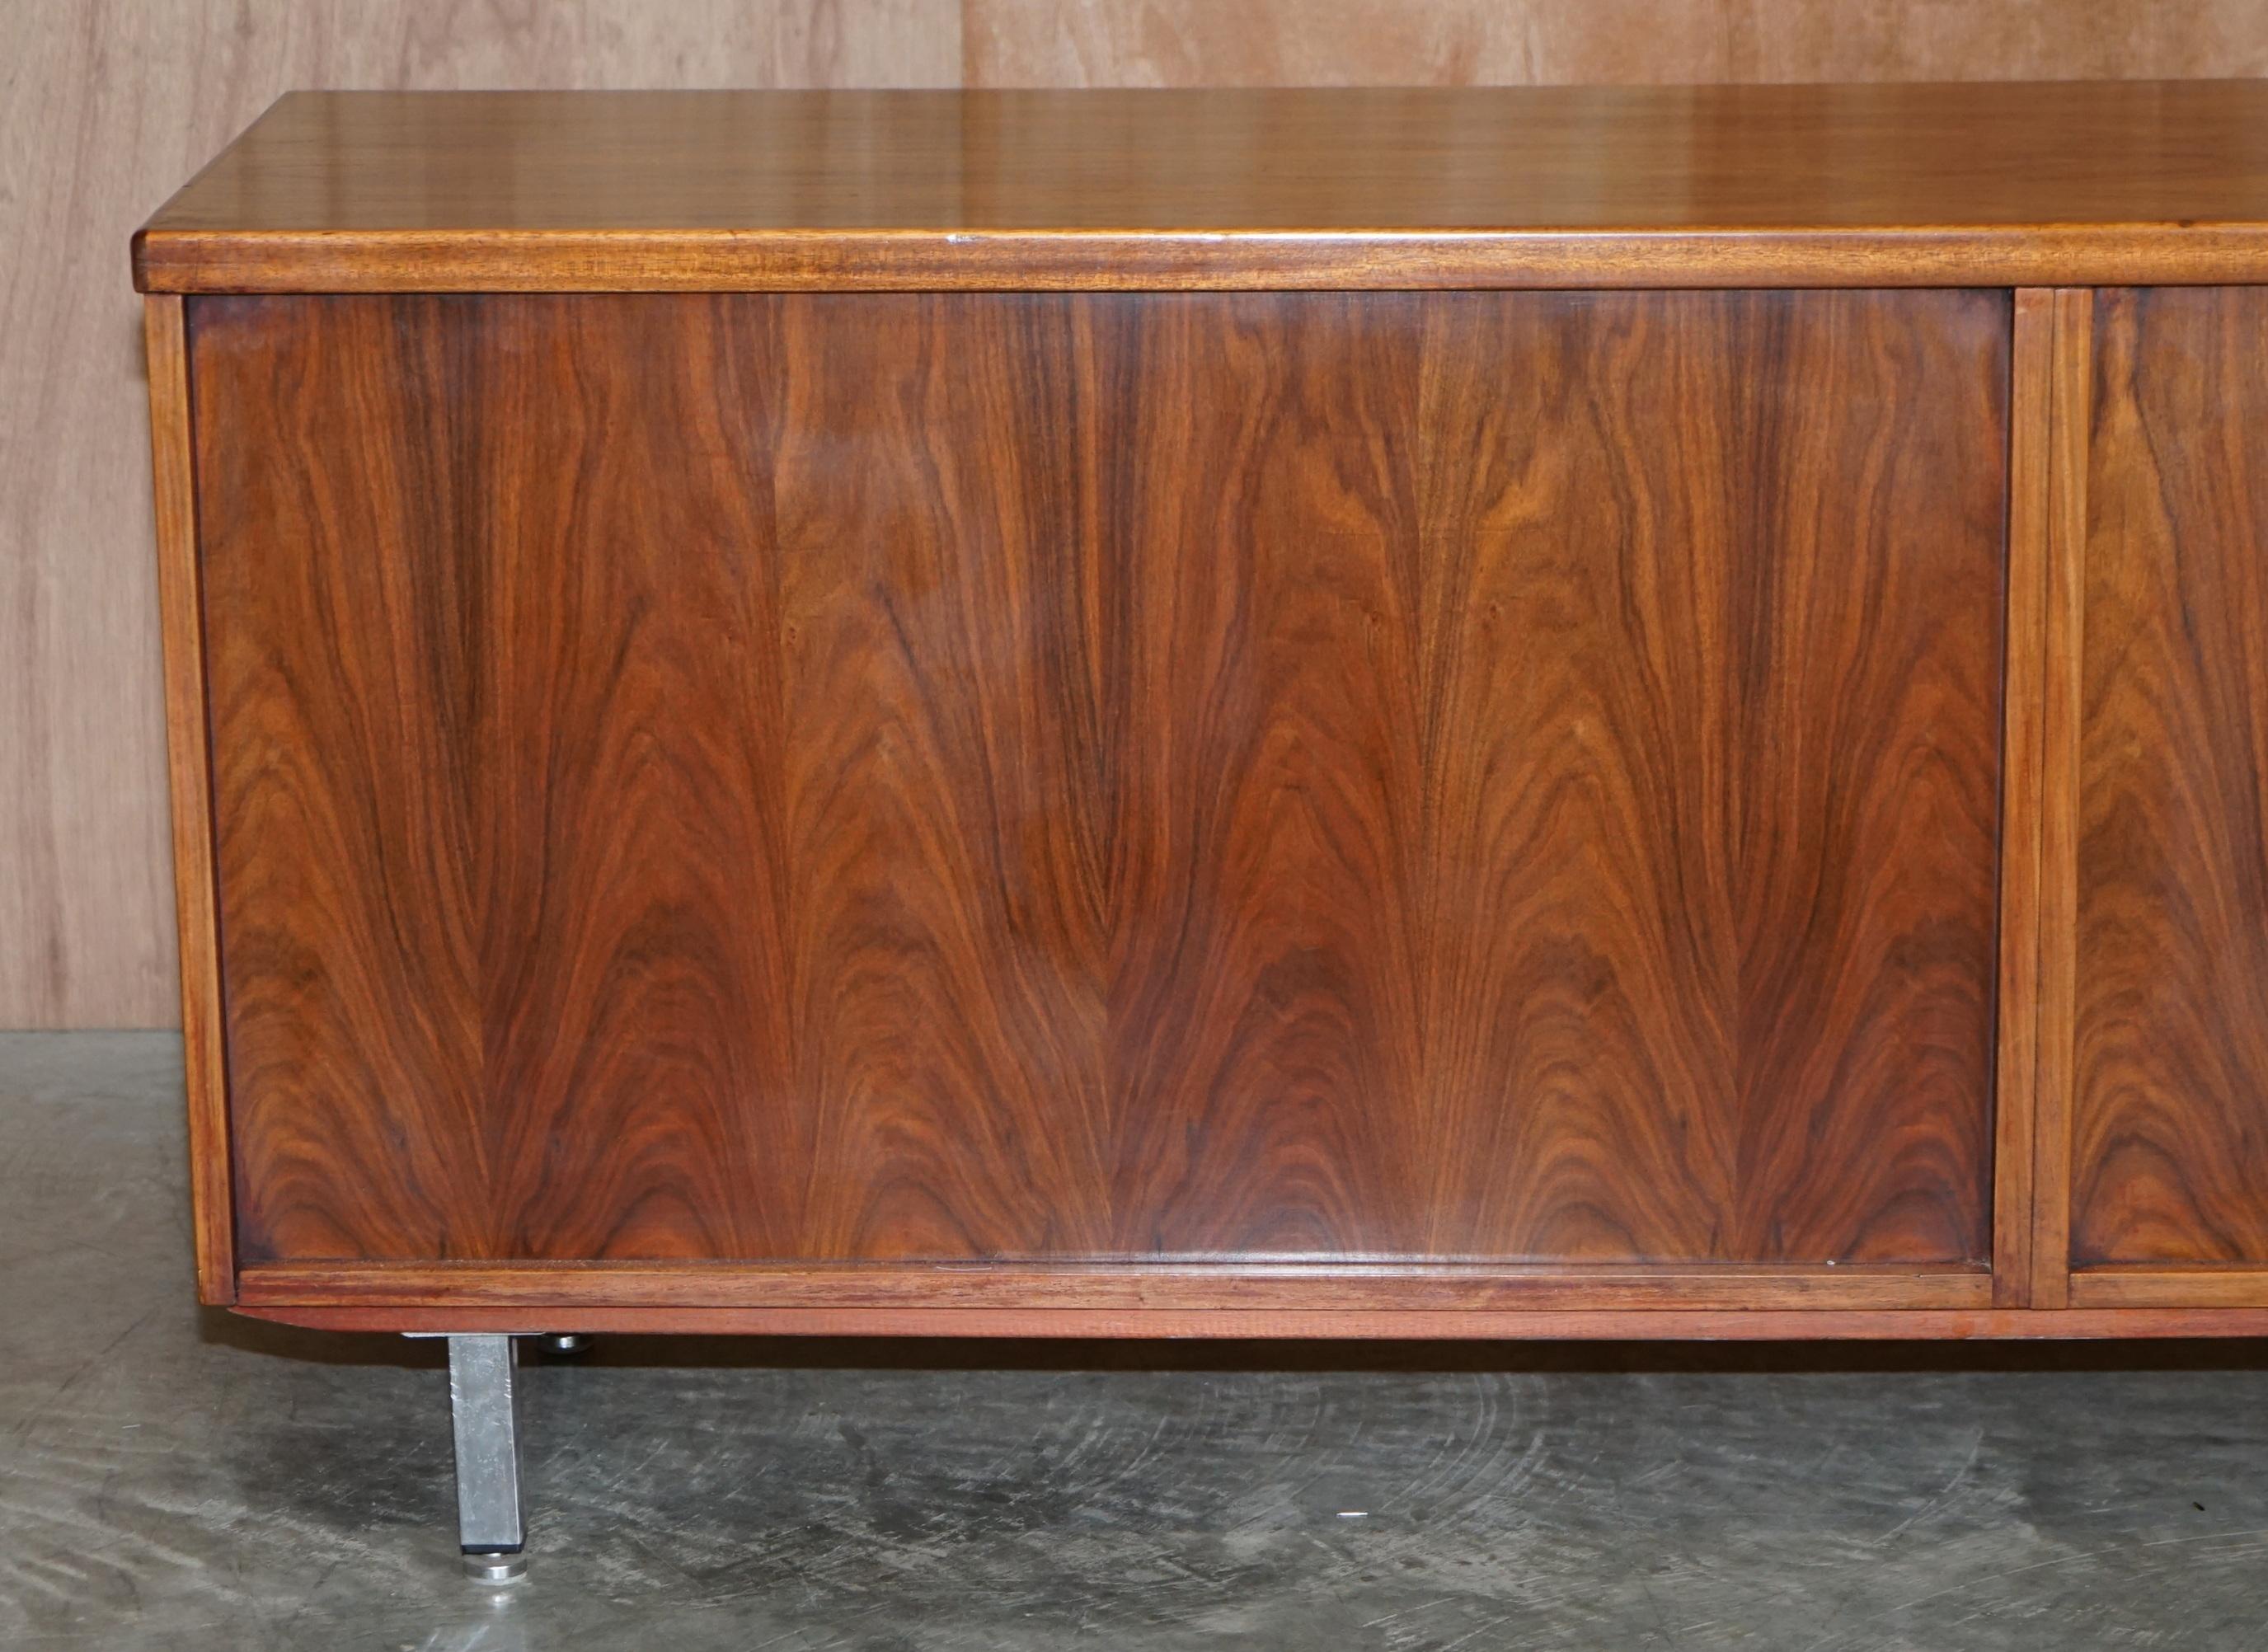 Stunning Restored Mid Century Modern Period Hardwood Sideboard with Chrome Legs For Sale 6